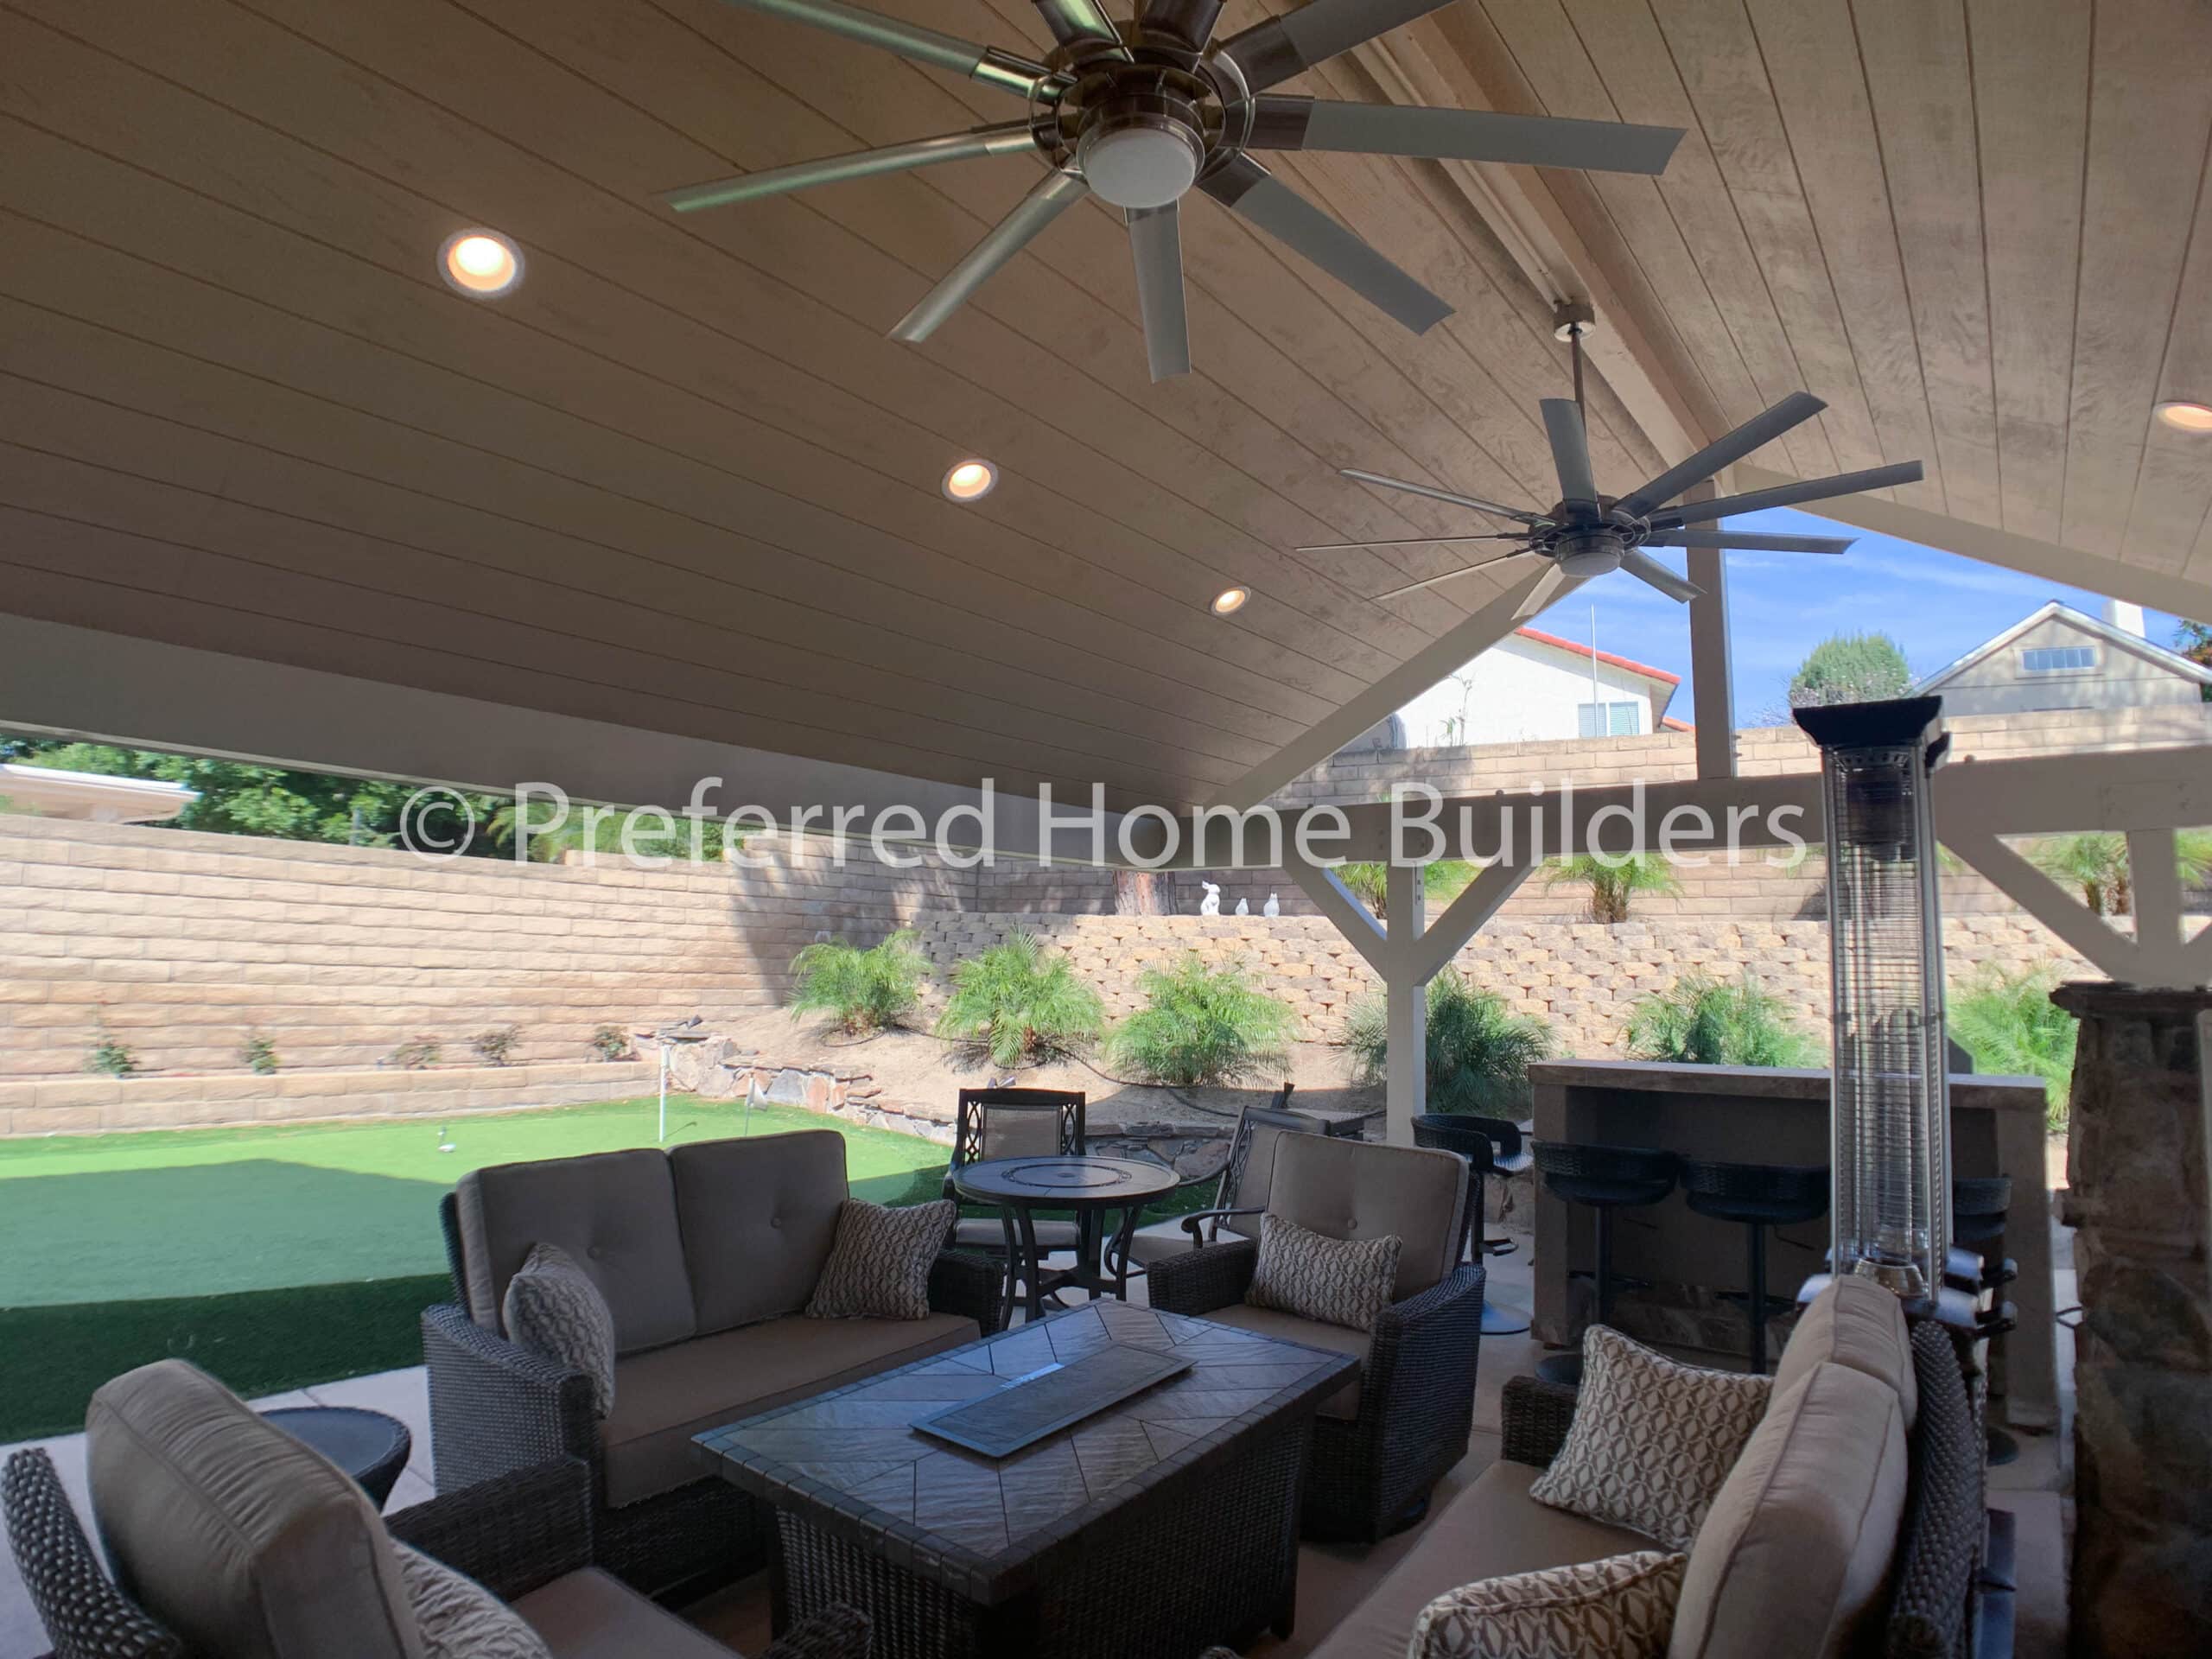 Covered Patio and Outdoor Kitchen Simi Valley 21 scaled 1